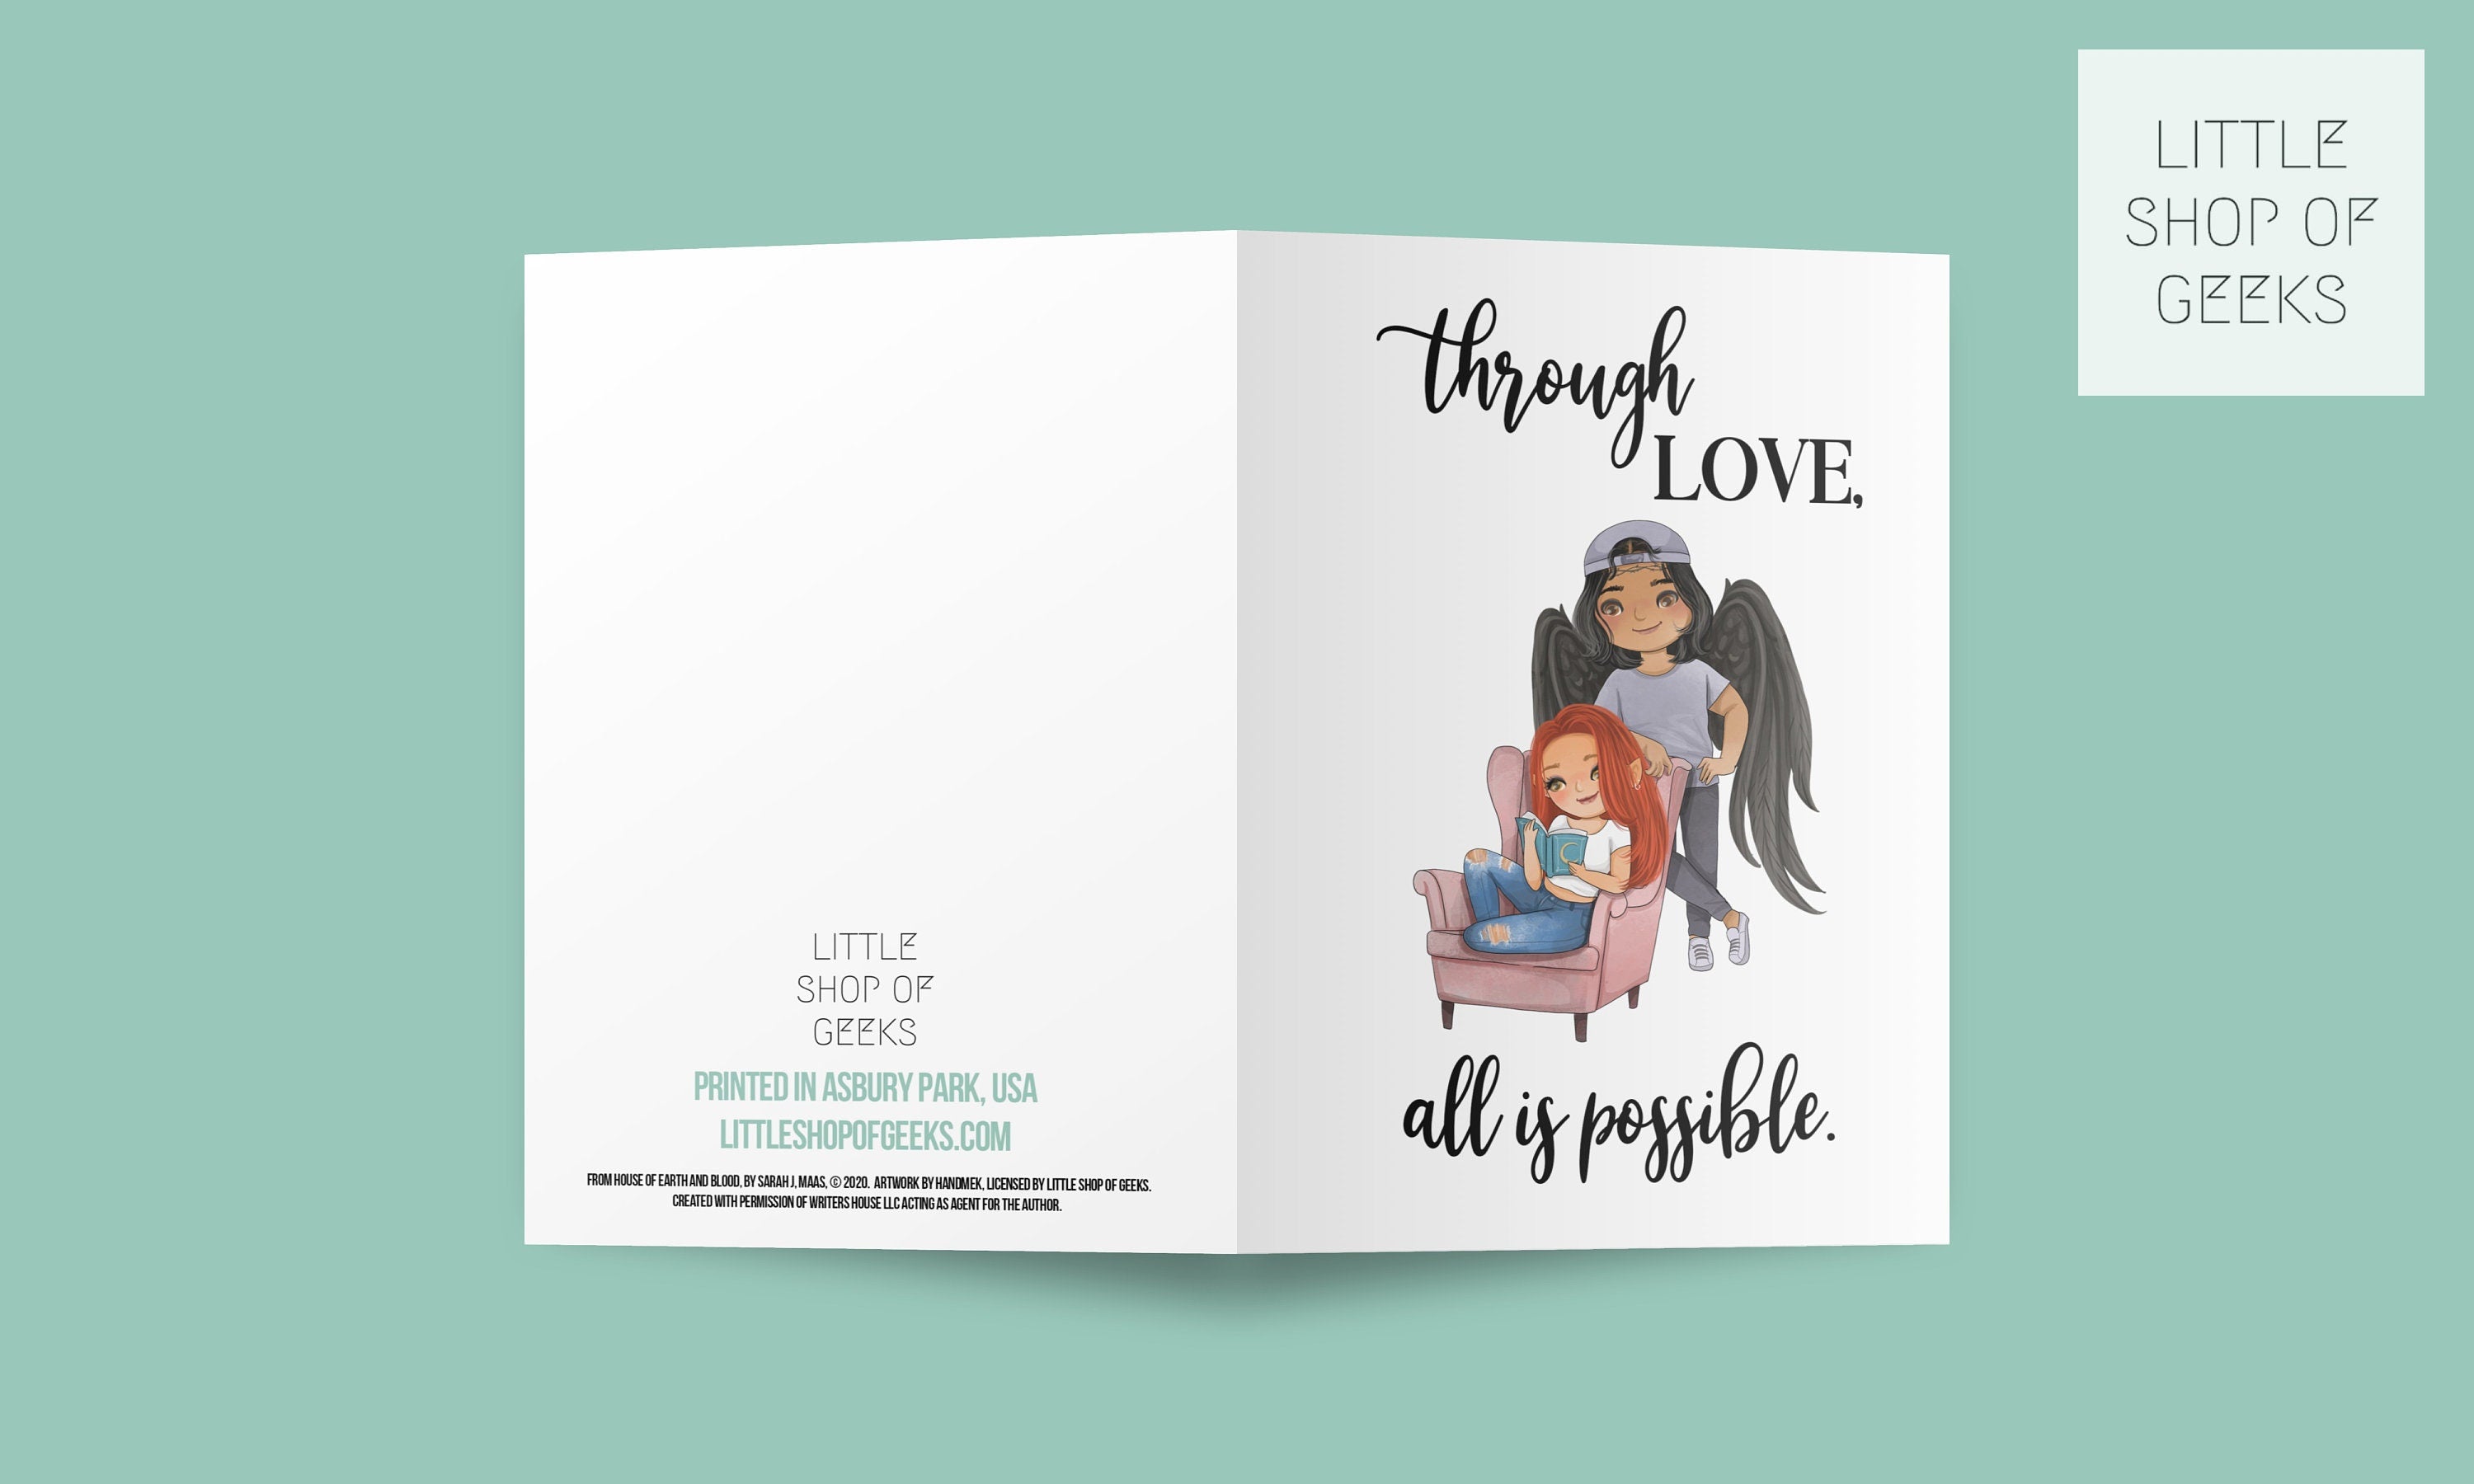 Crescent City Greeting Card 5x7 - Through Love All Is Possible 